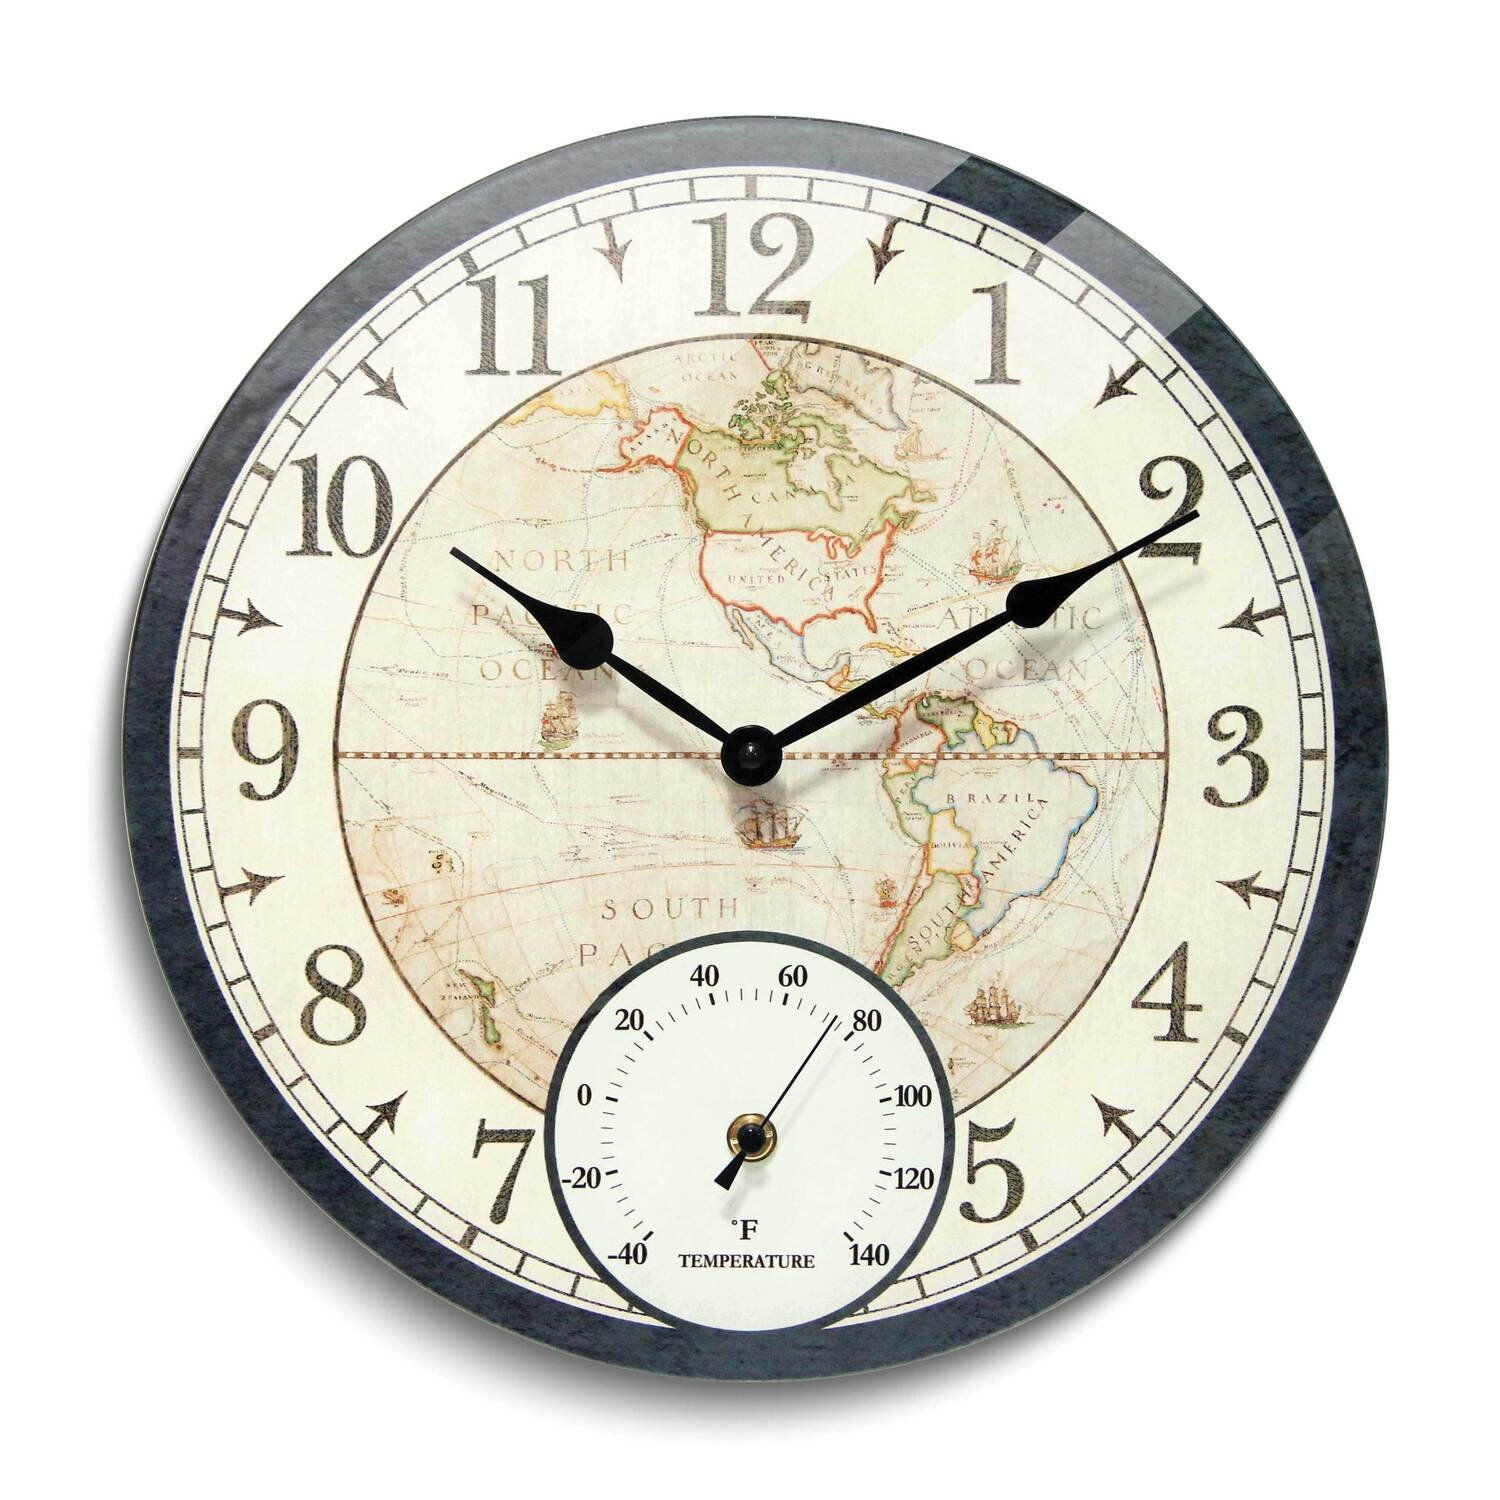 Orbis Black All Weather World Map In and Outdoor Wall Clock GM25020